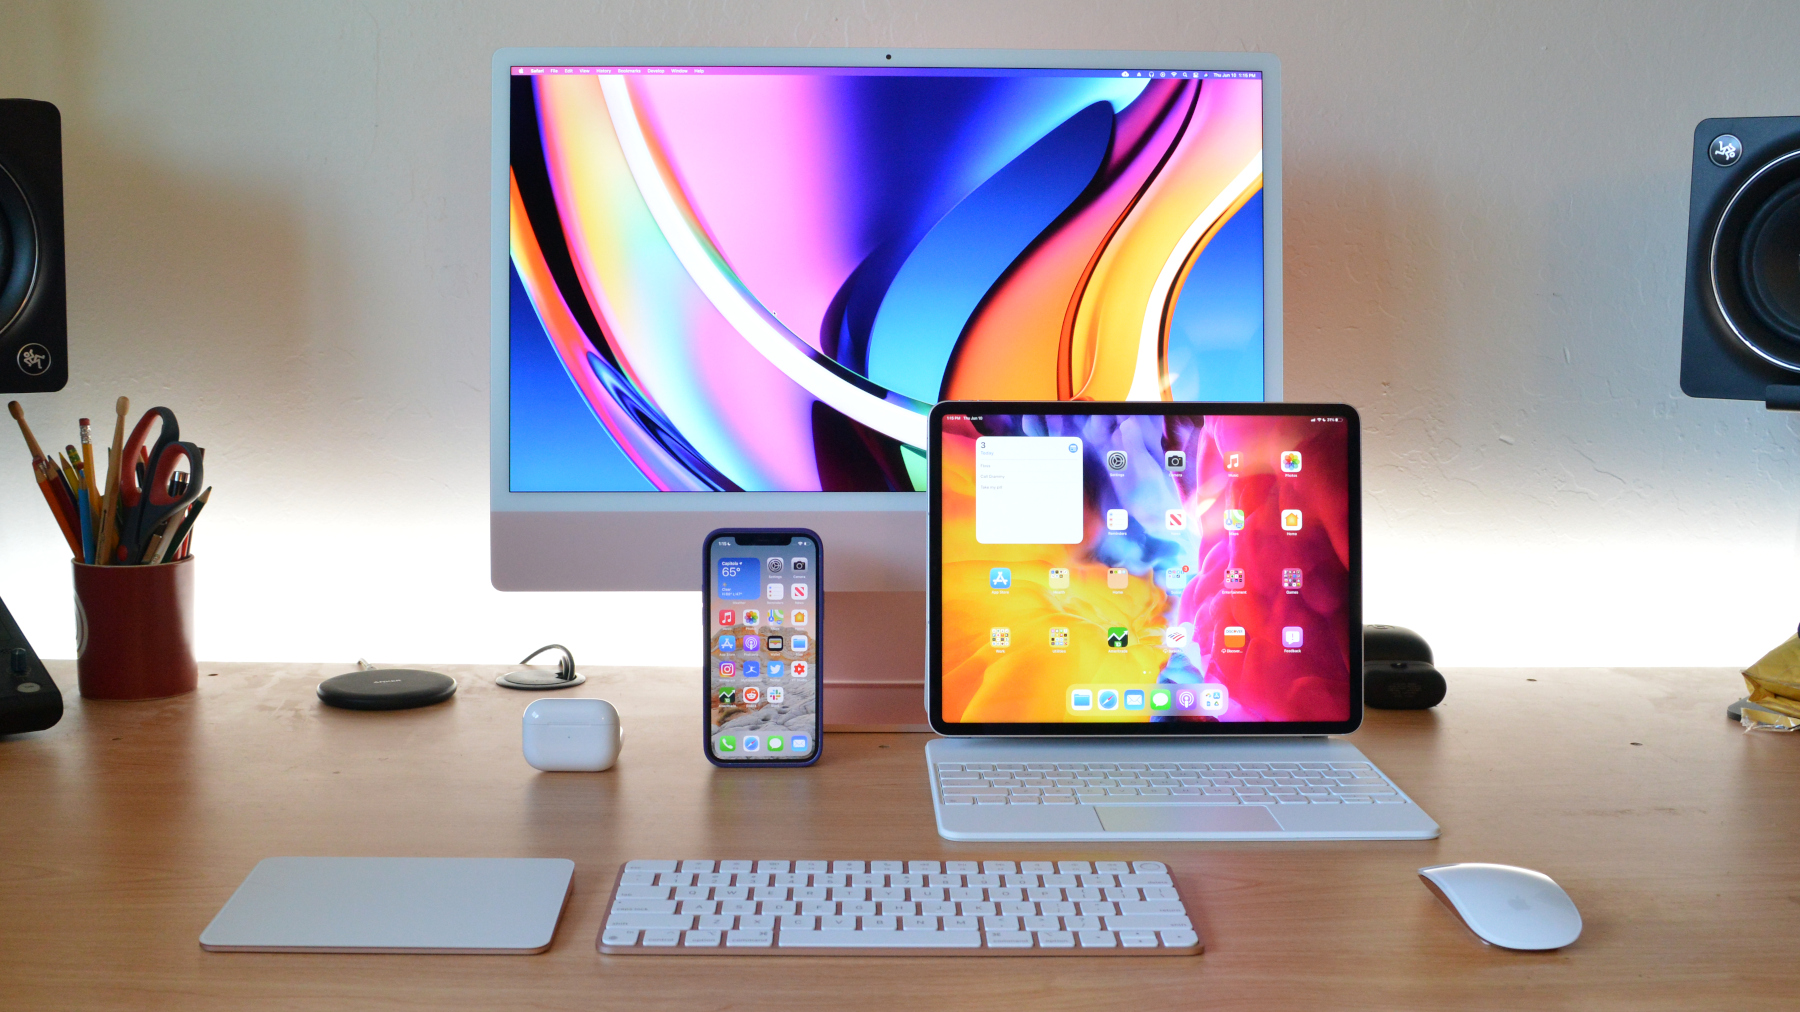 Apple iMac pictured with iPad, iPhone, AirPods, keyboard, mouse, and trackpad on a wood table.